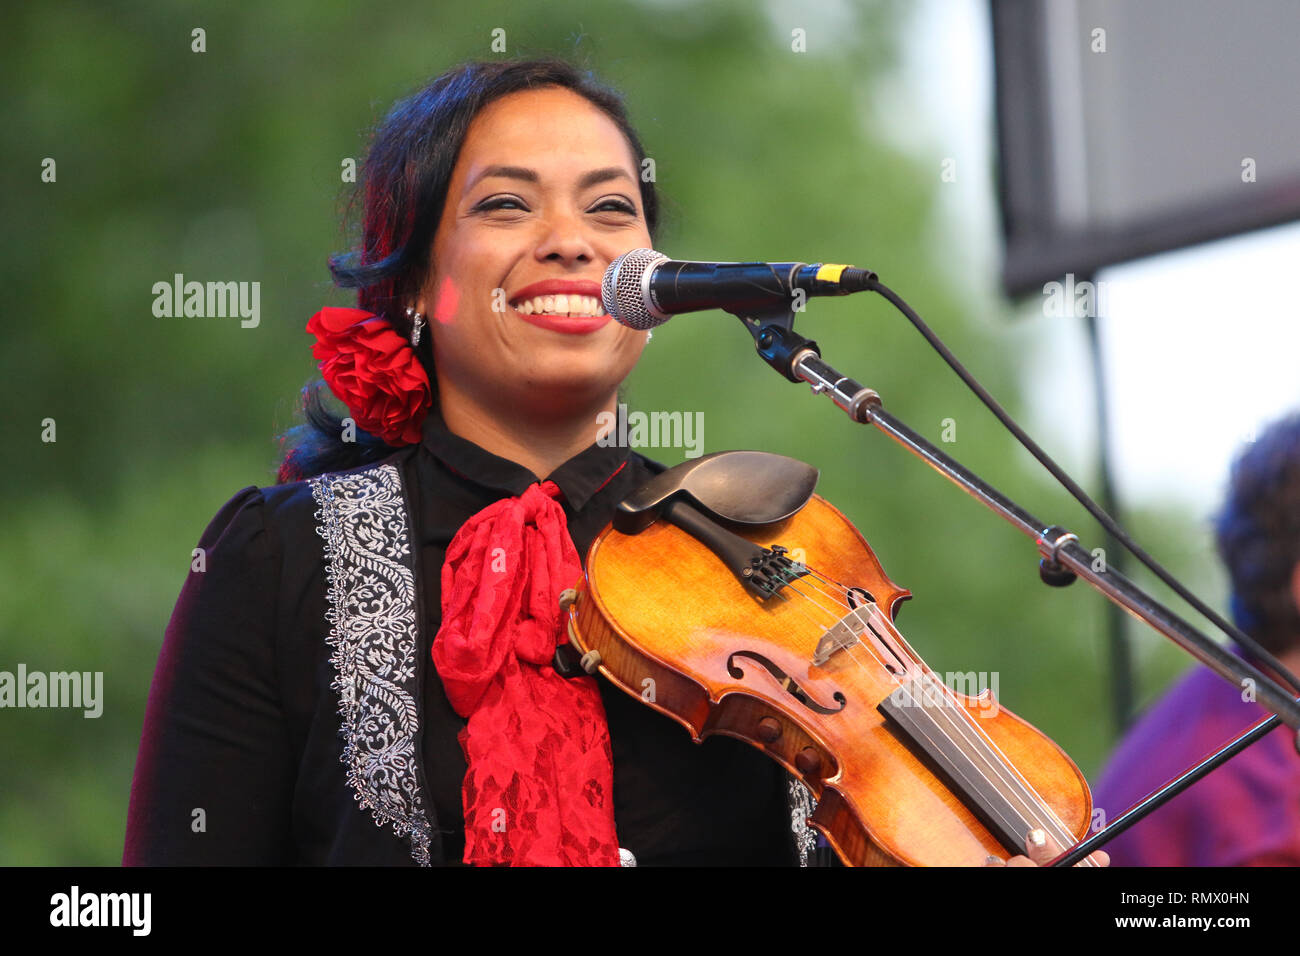 Singer and Violin player Mireya Ramos is shown performing on stage during a  "live" concert appearance with Mariachi Flor De Toloache Stock Photo - Alamy